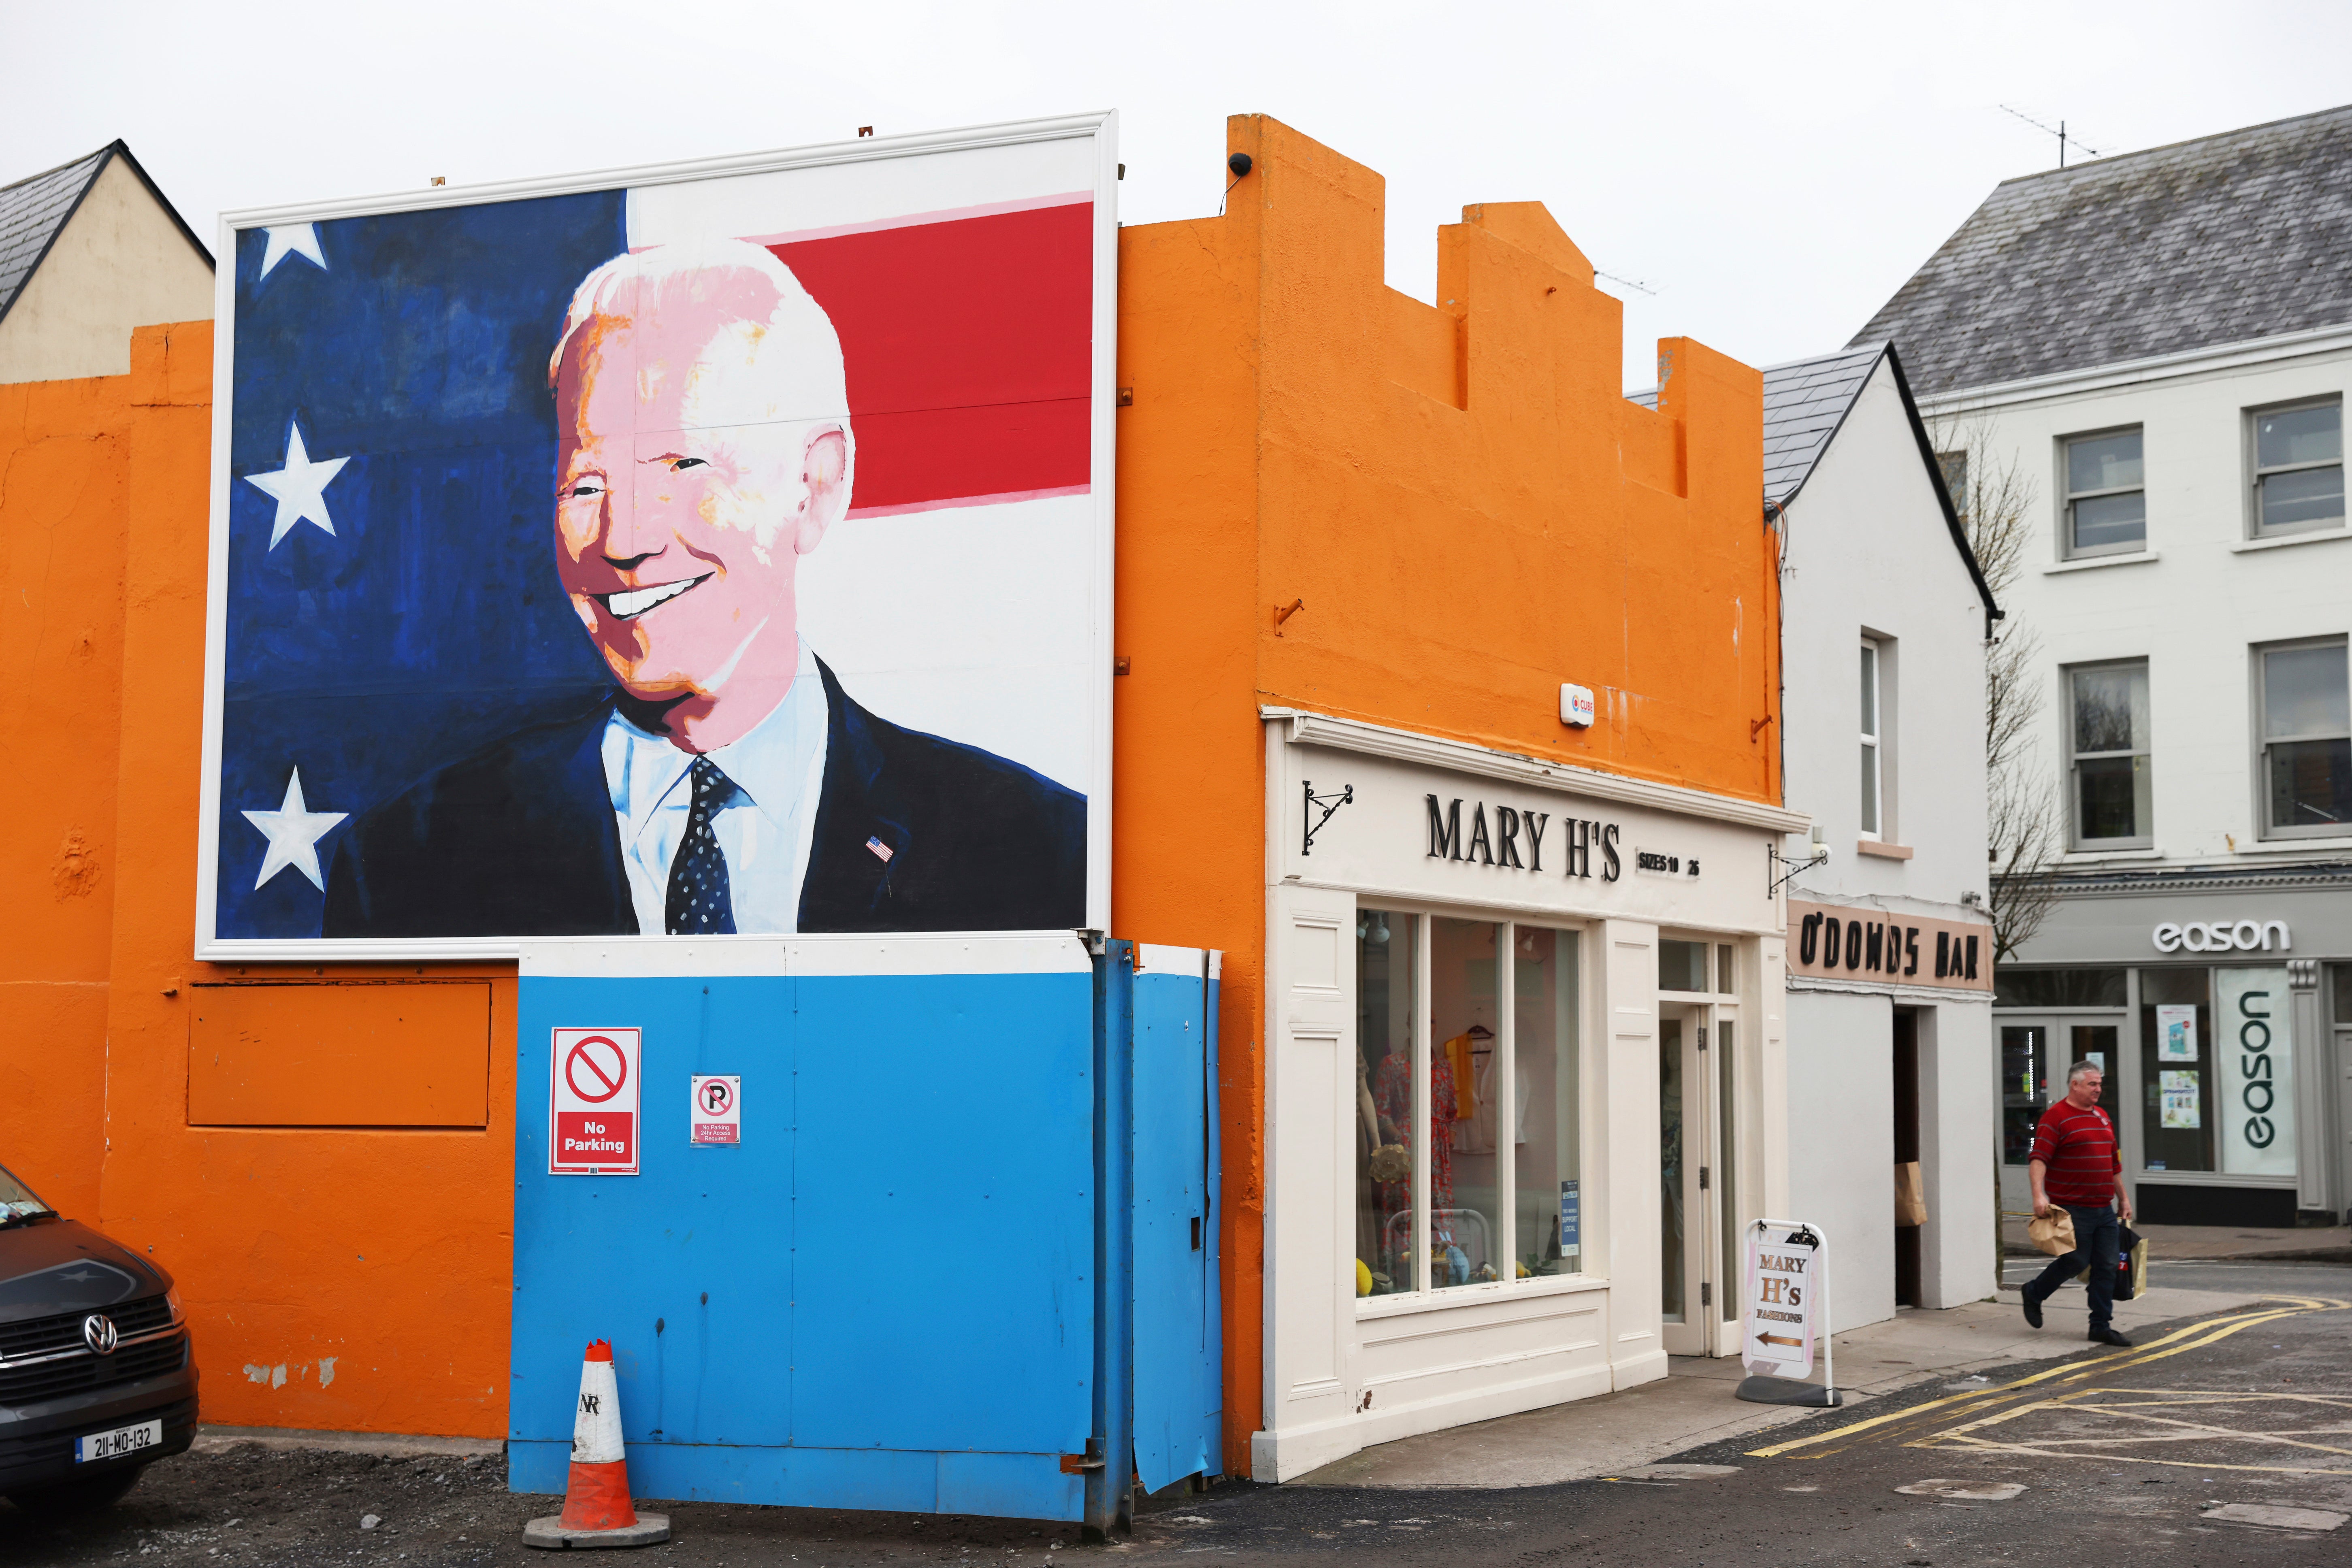 A mural of US president Joe Biden adorns the side of a shop in Ballina, Co Mayo